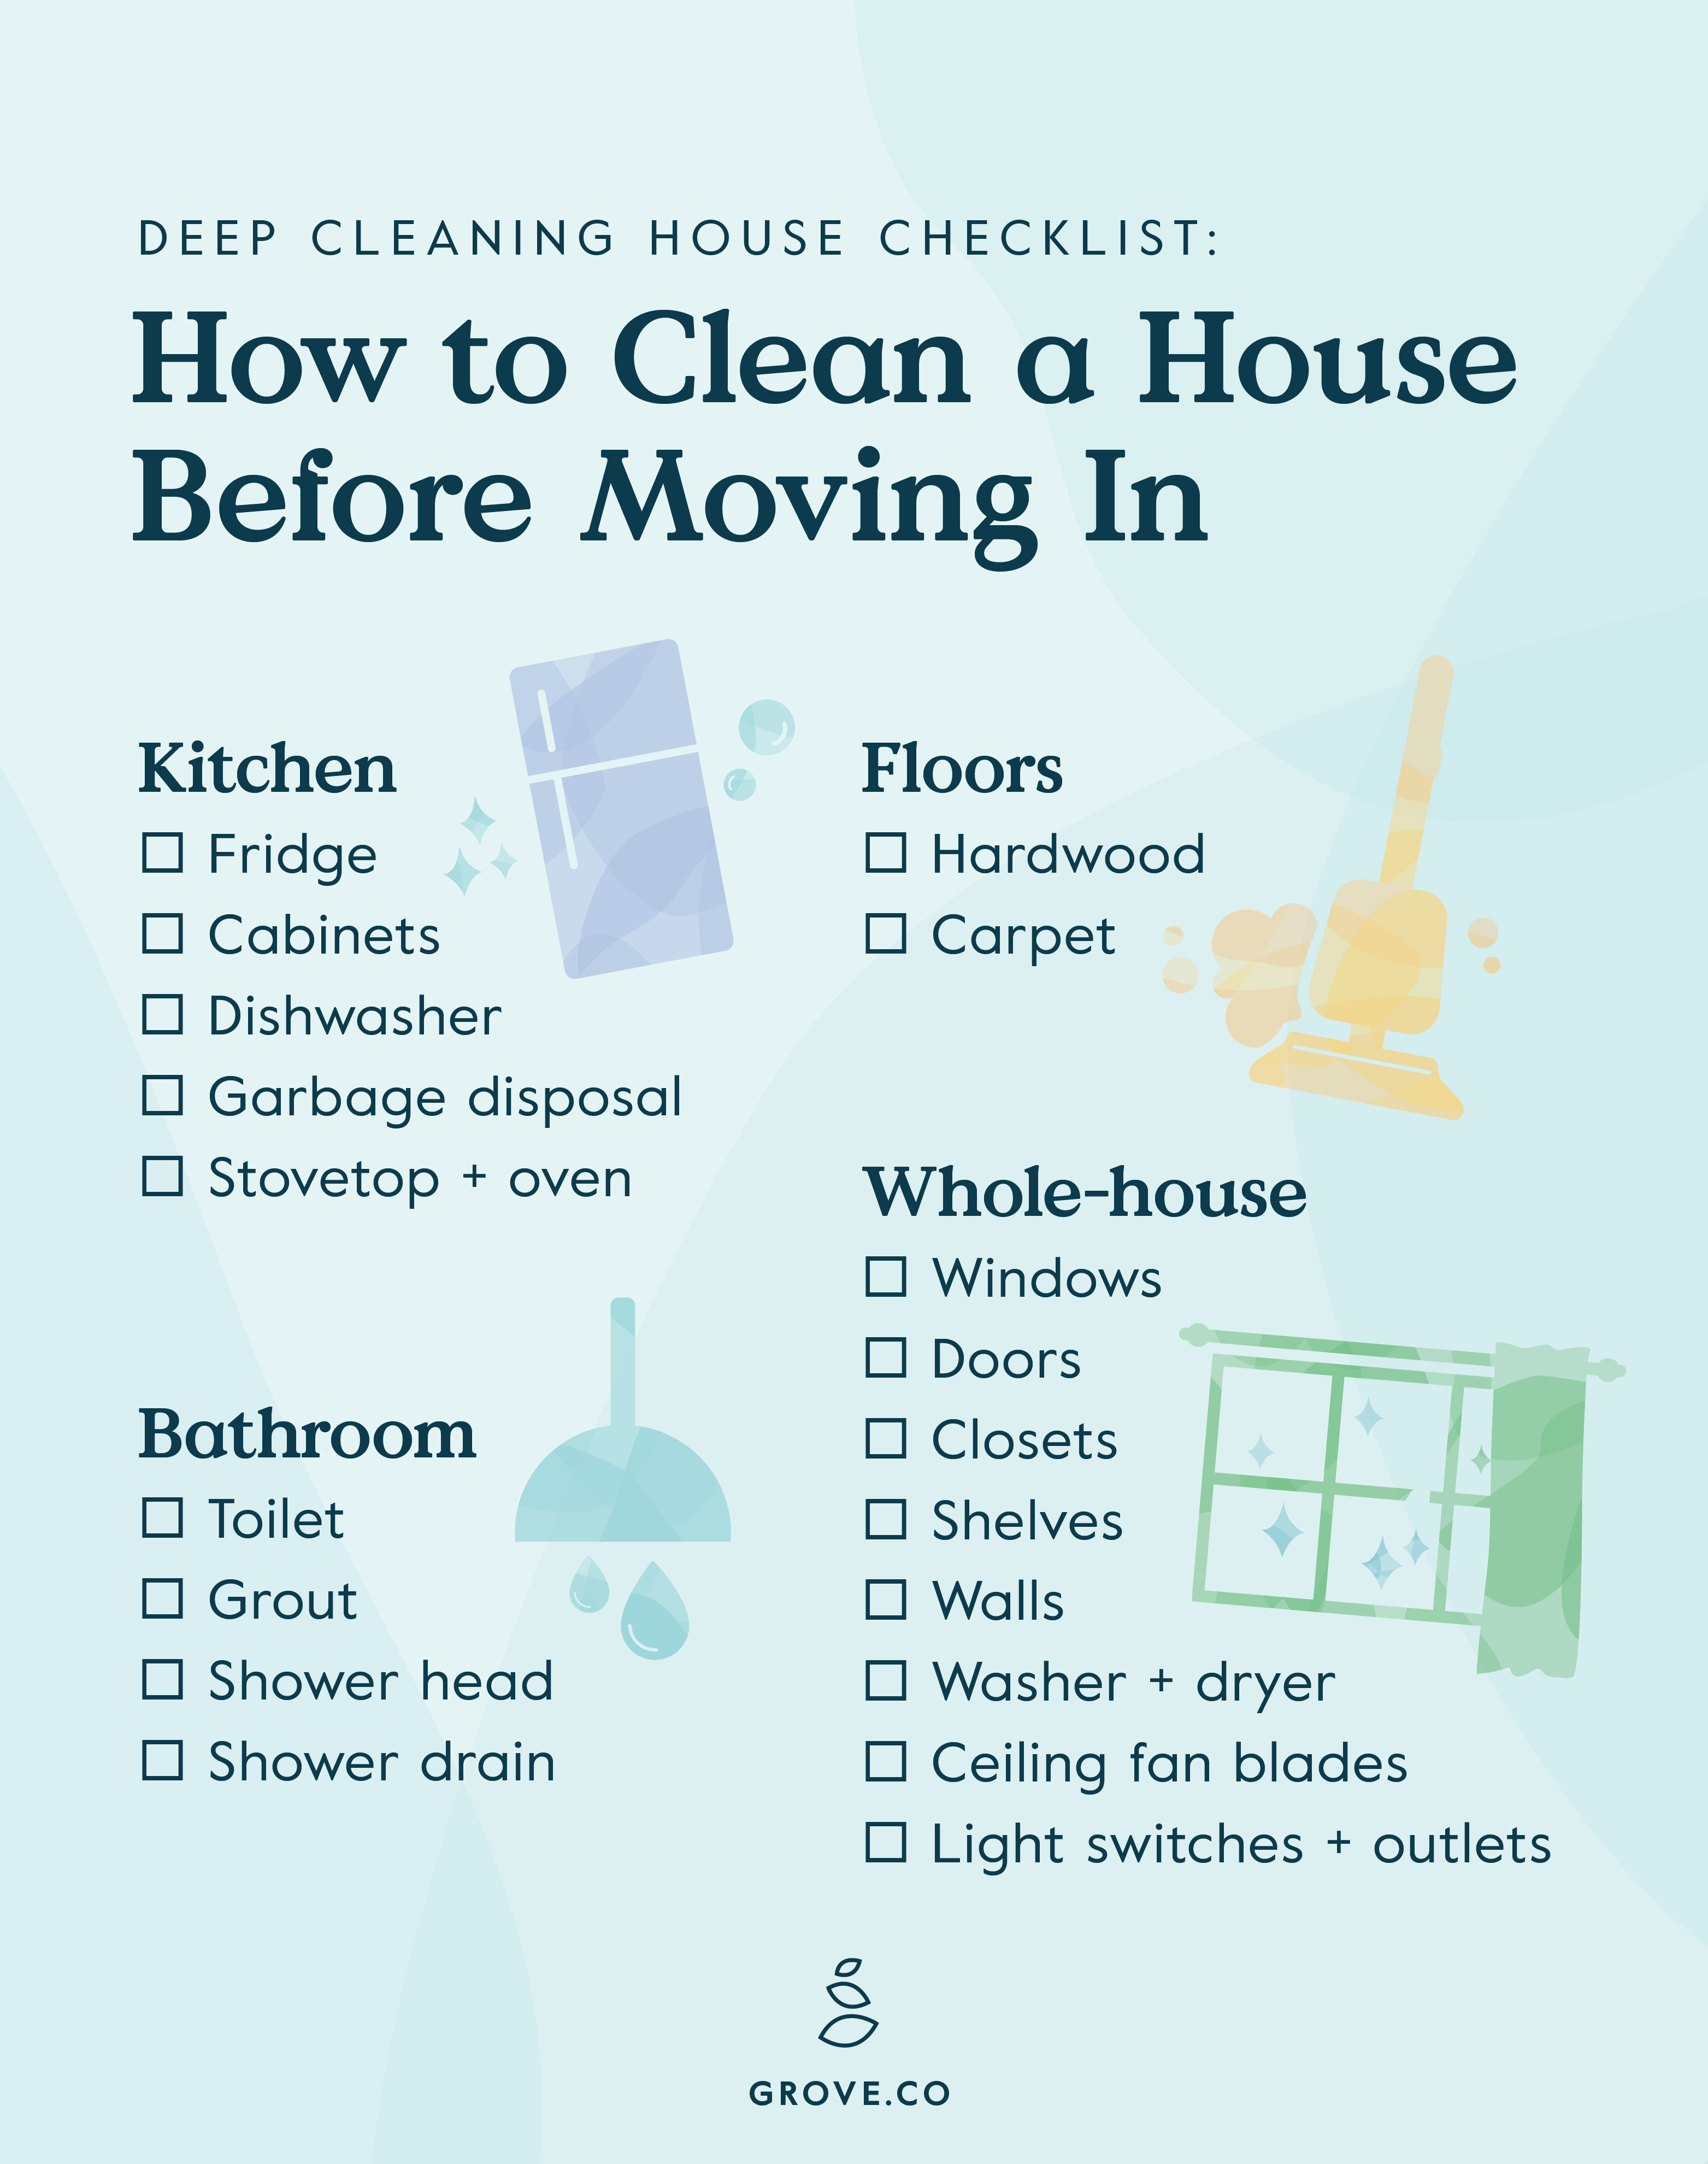 Before you hire a cleaning service for your house, here are some questions to ask
